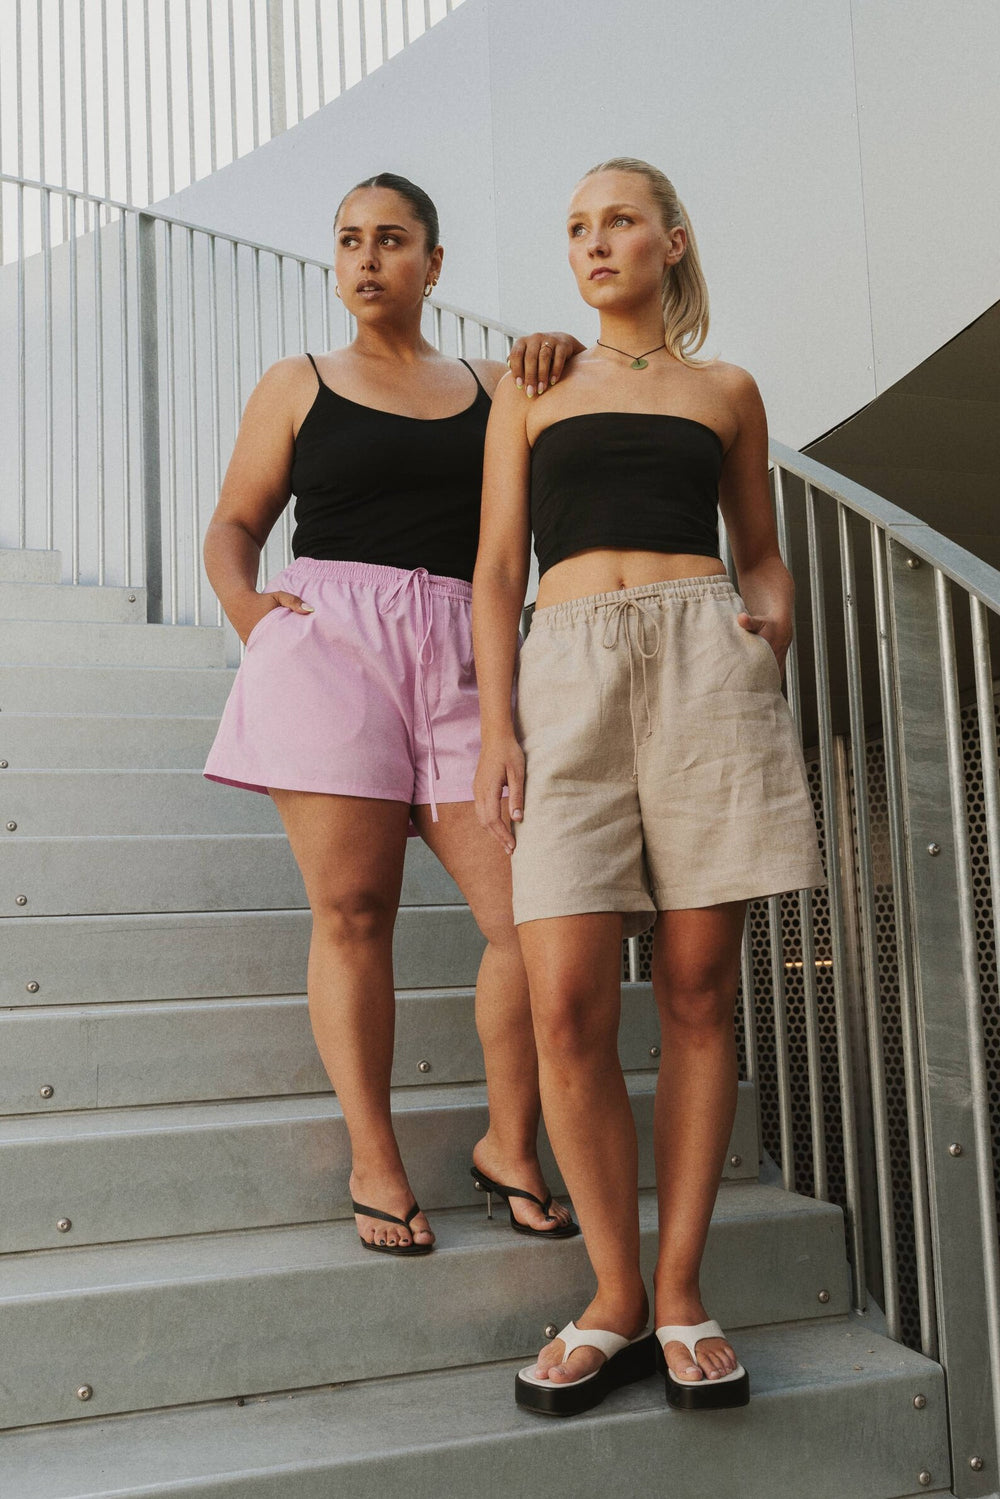 Women wearing the Breezy Shorts sewing pattern from Puff and Pencil on The Fold Line. A shorts pattern made in cotton twill, linen and taslan fabrics, featuring a relaxed fit, elastic waistband with adjustable ties, two front slash pockets, two back patch